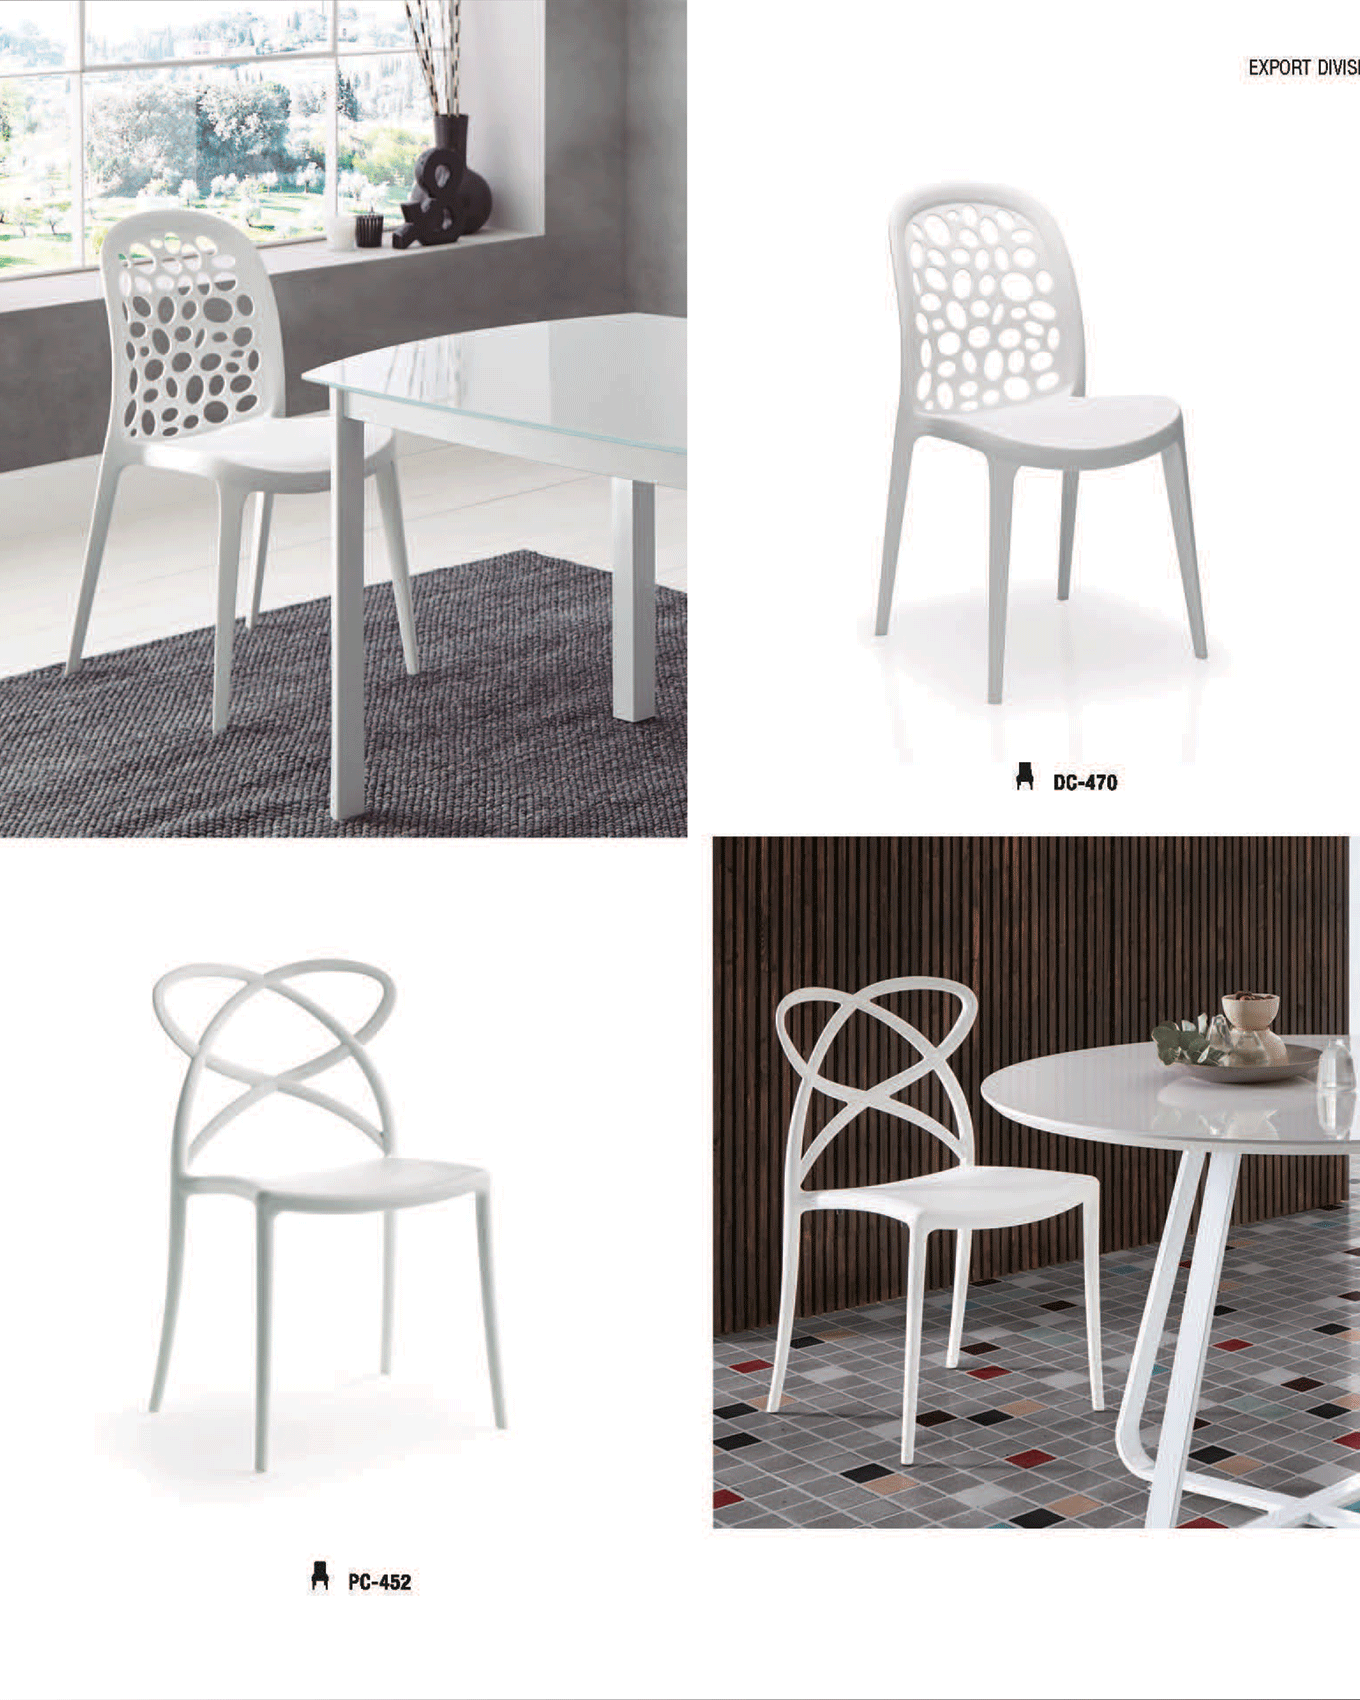 Dining Room Furniture Tables DC-470, PC-452 Chair